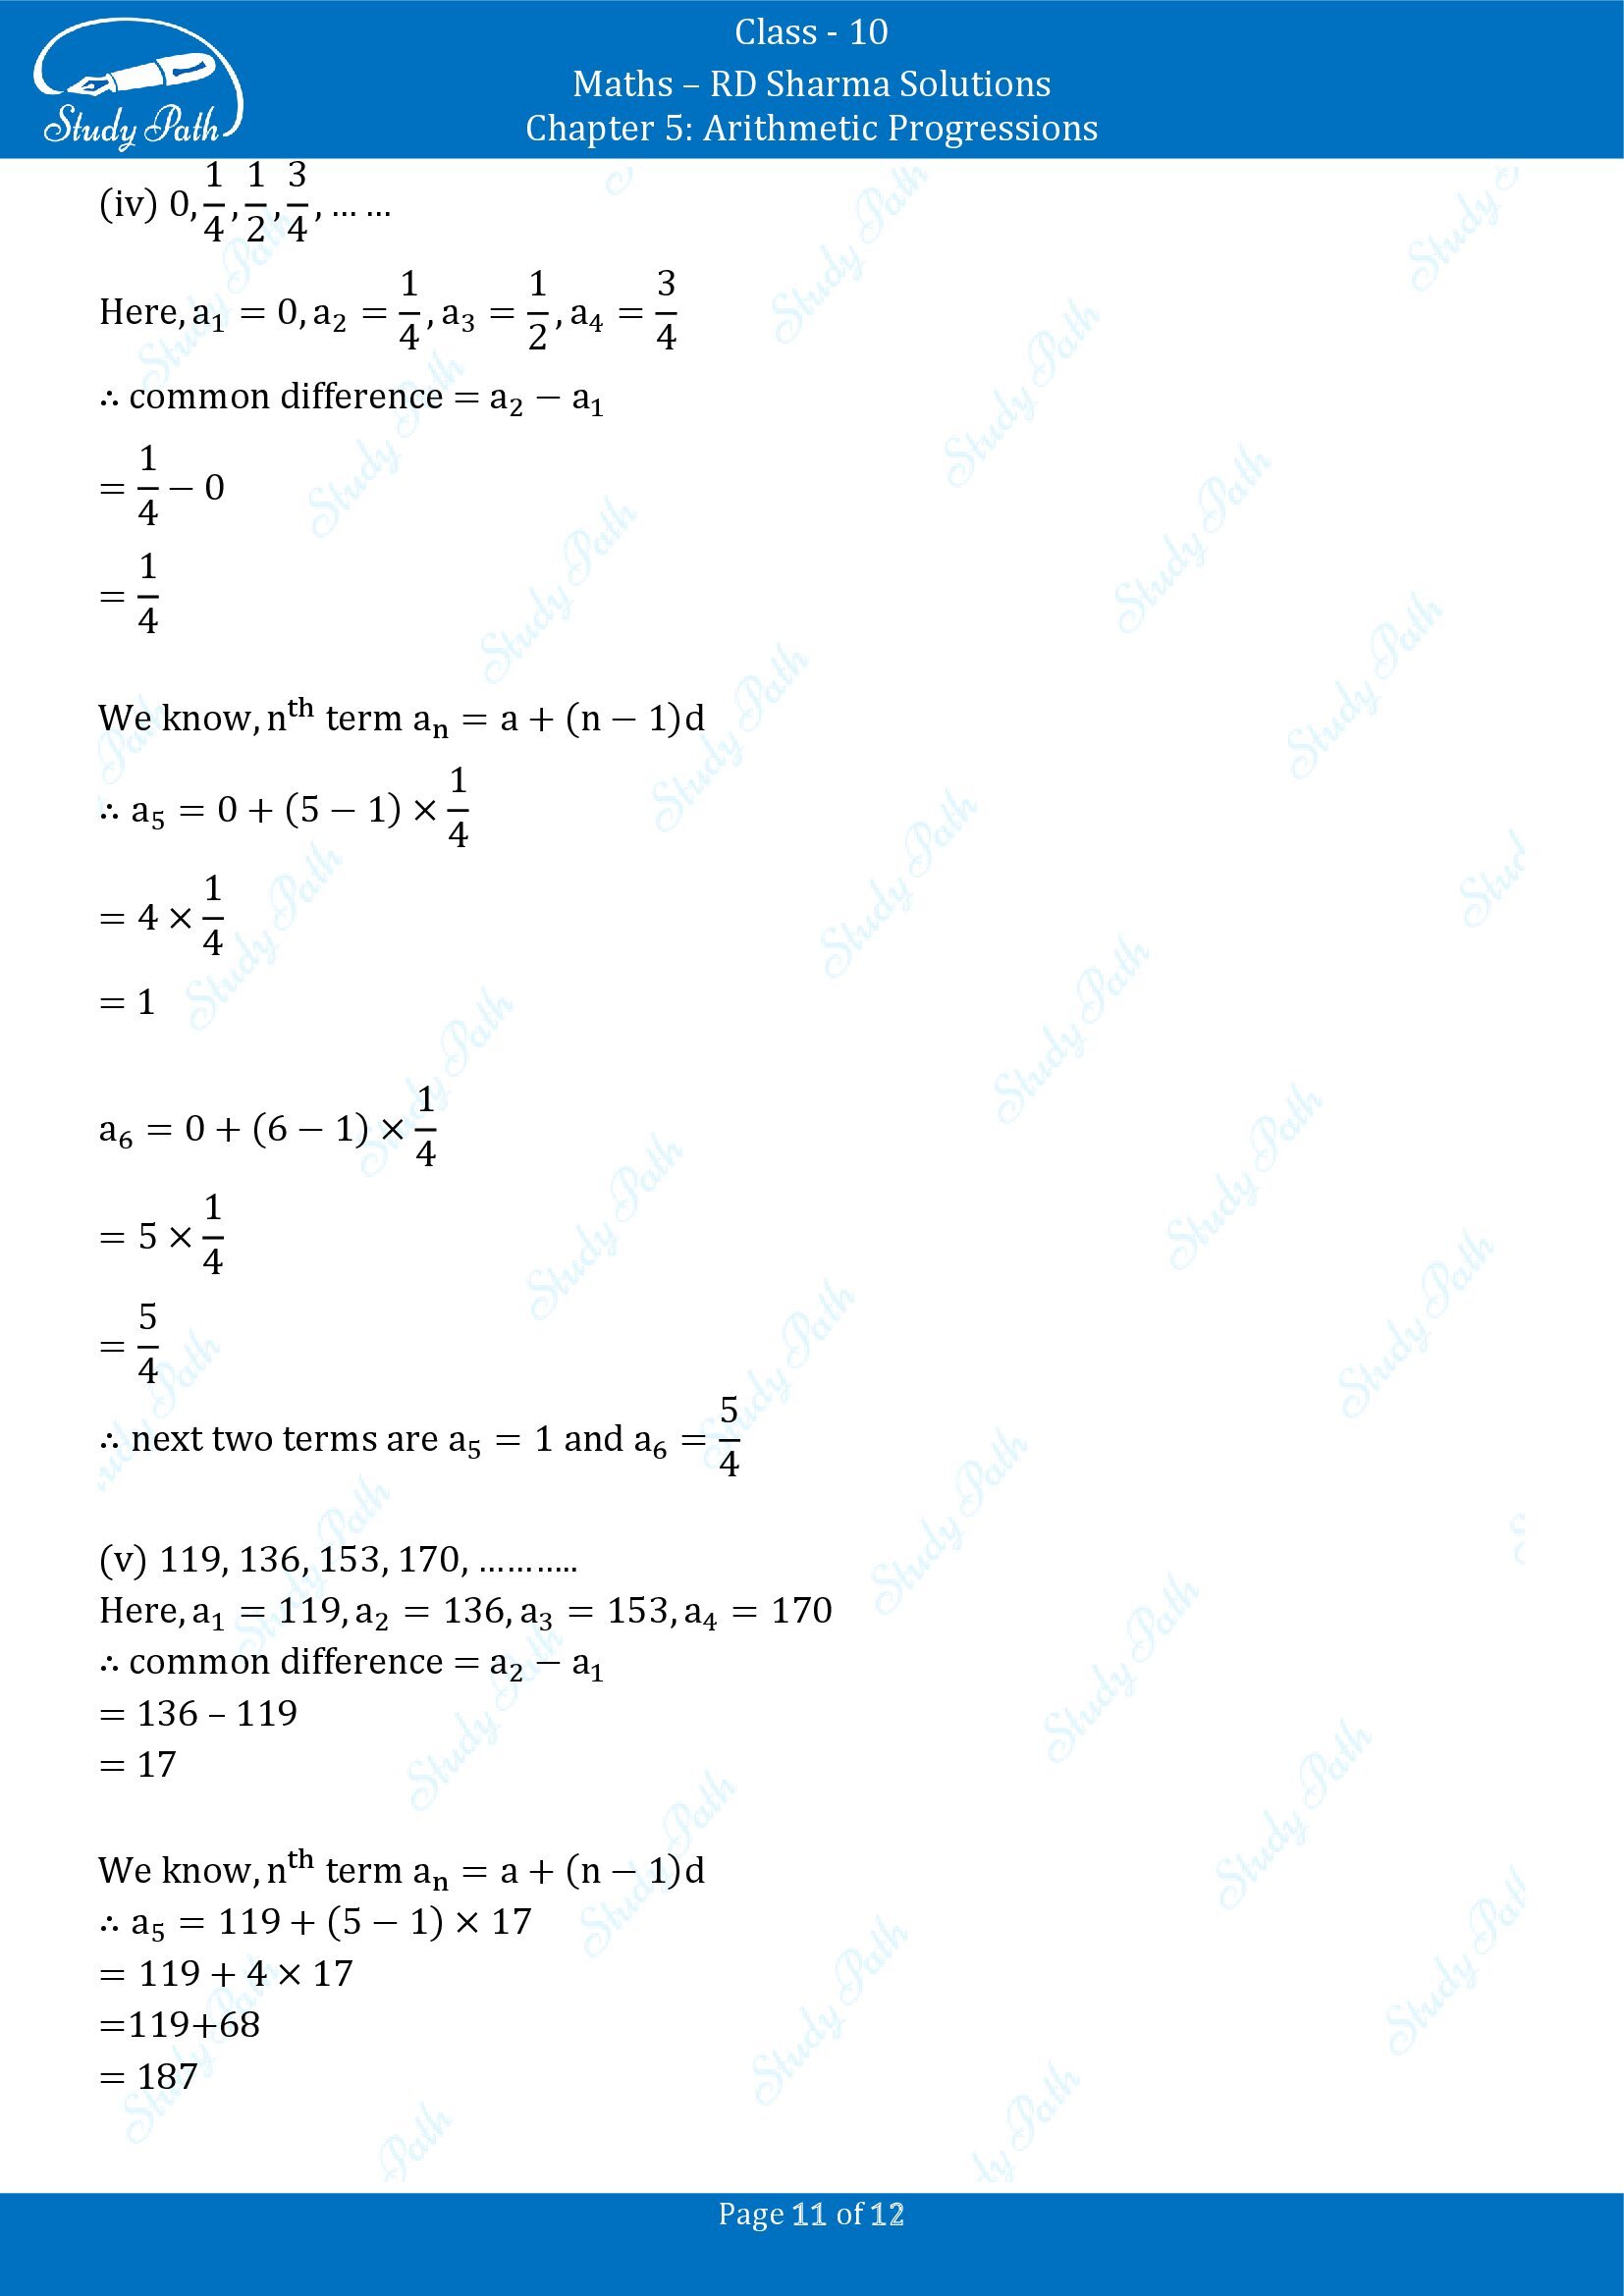 RD Sharma Solutions Class 10 Chapter 5 Arithmetic Progressions Exercise 5.3 00011